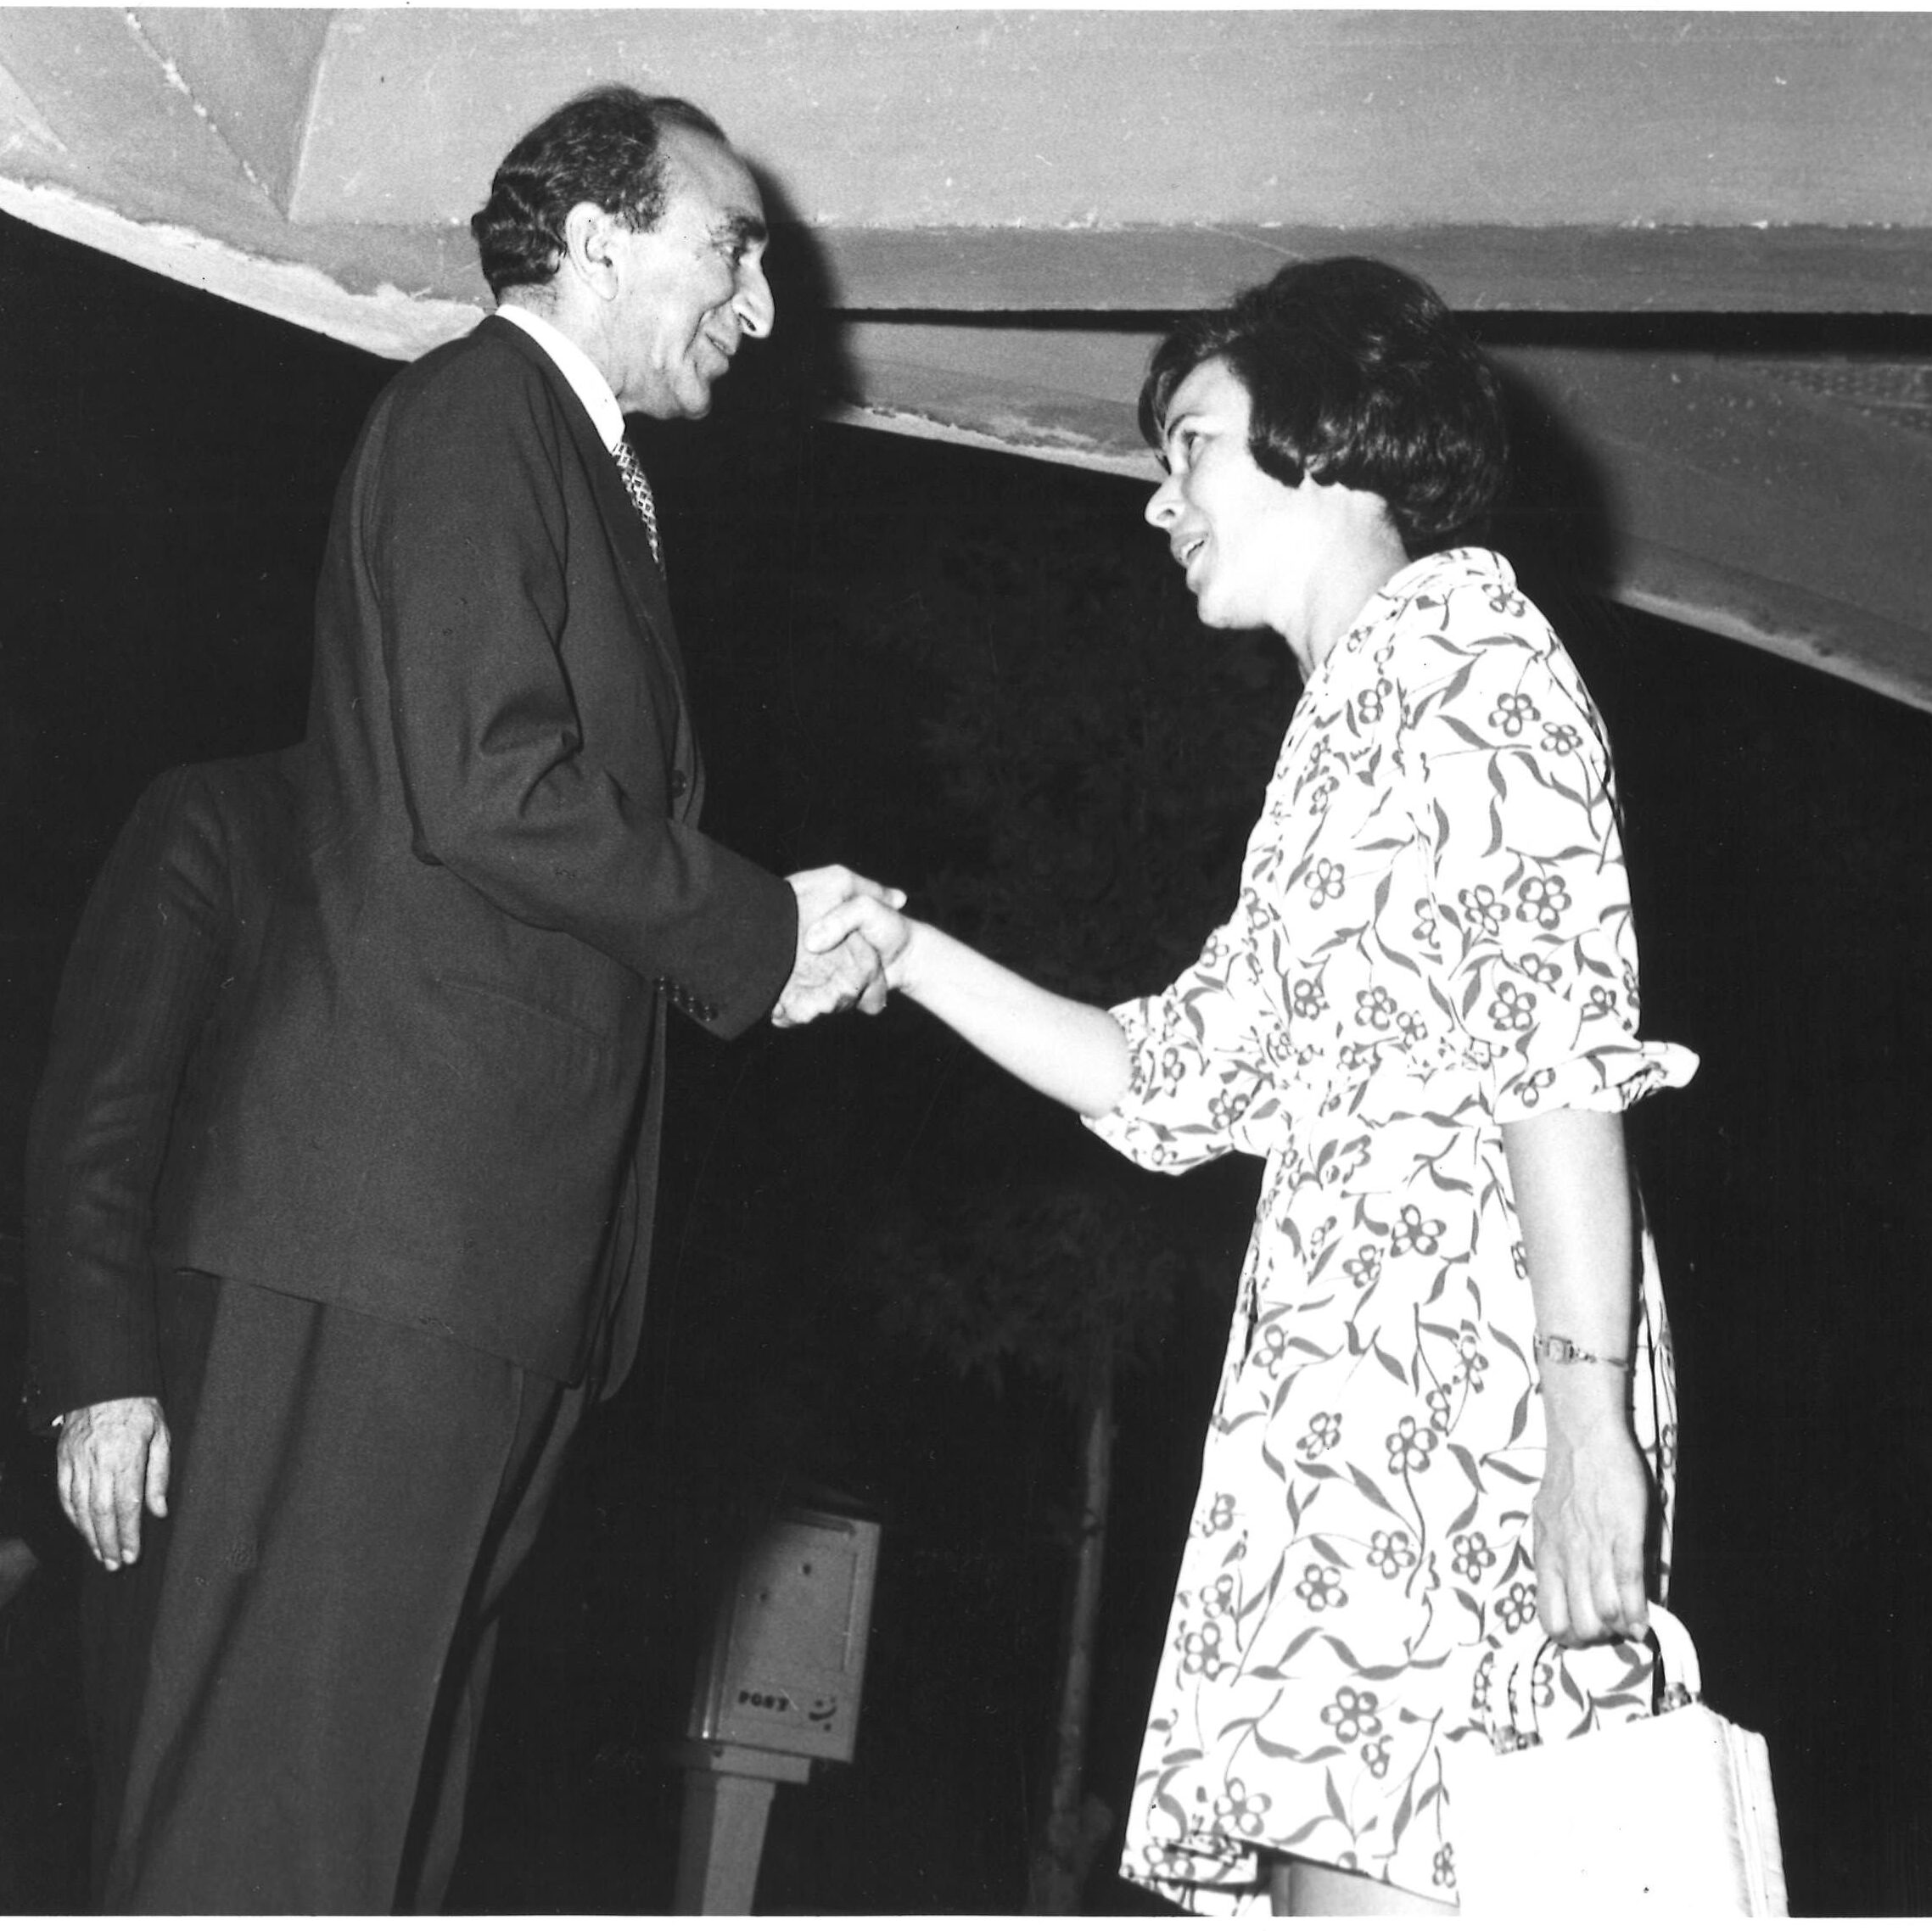 Woman in a dress shakes a man in a suits hand.